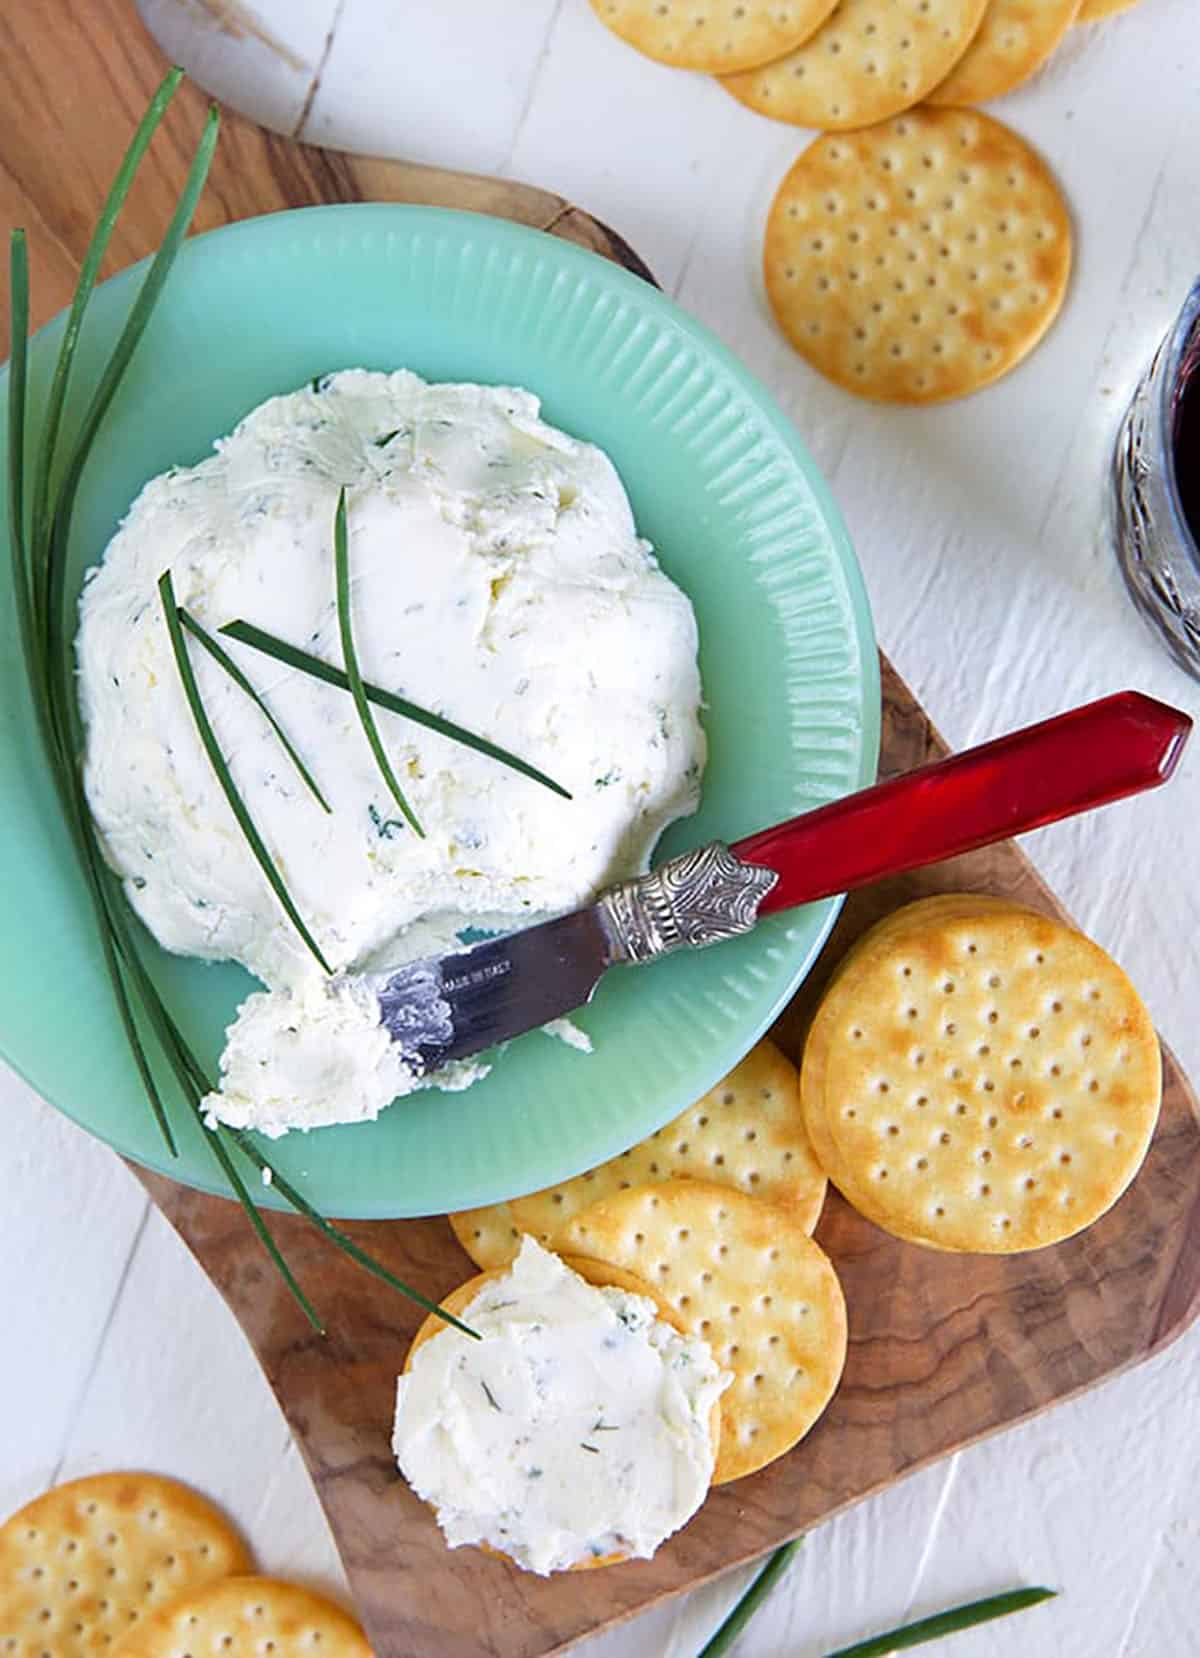 A blue bowl contains a large serving of Boursin cheese.